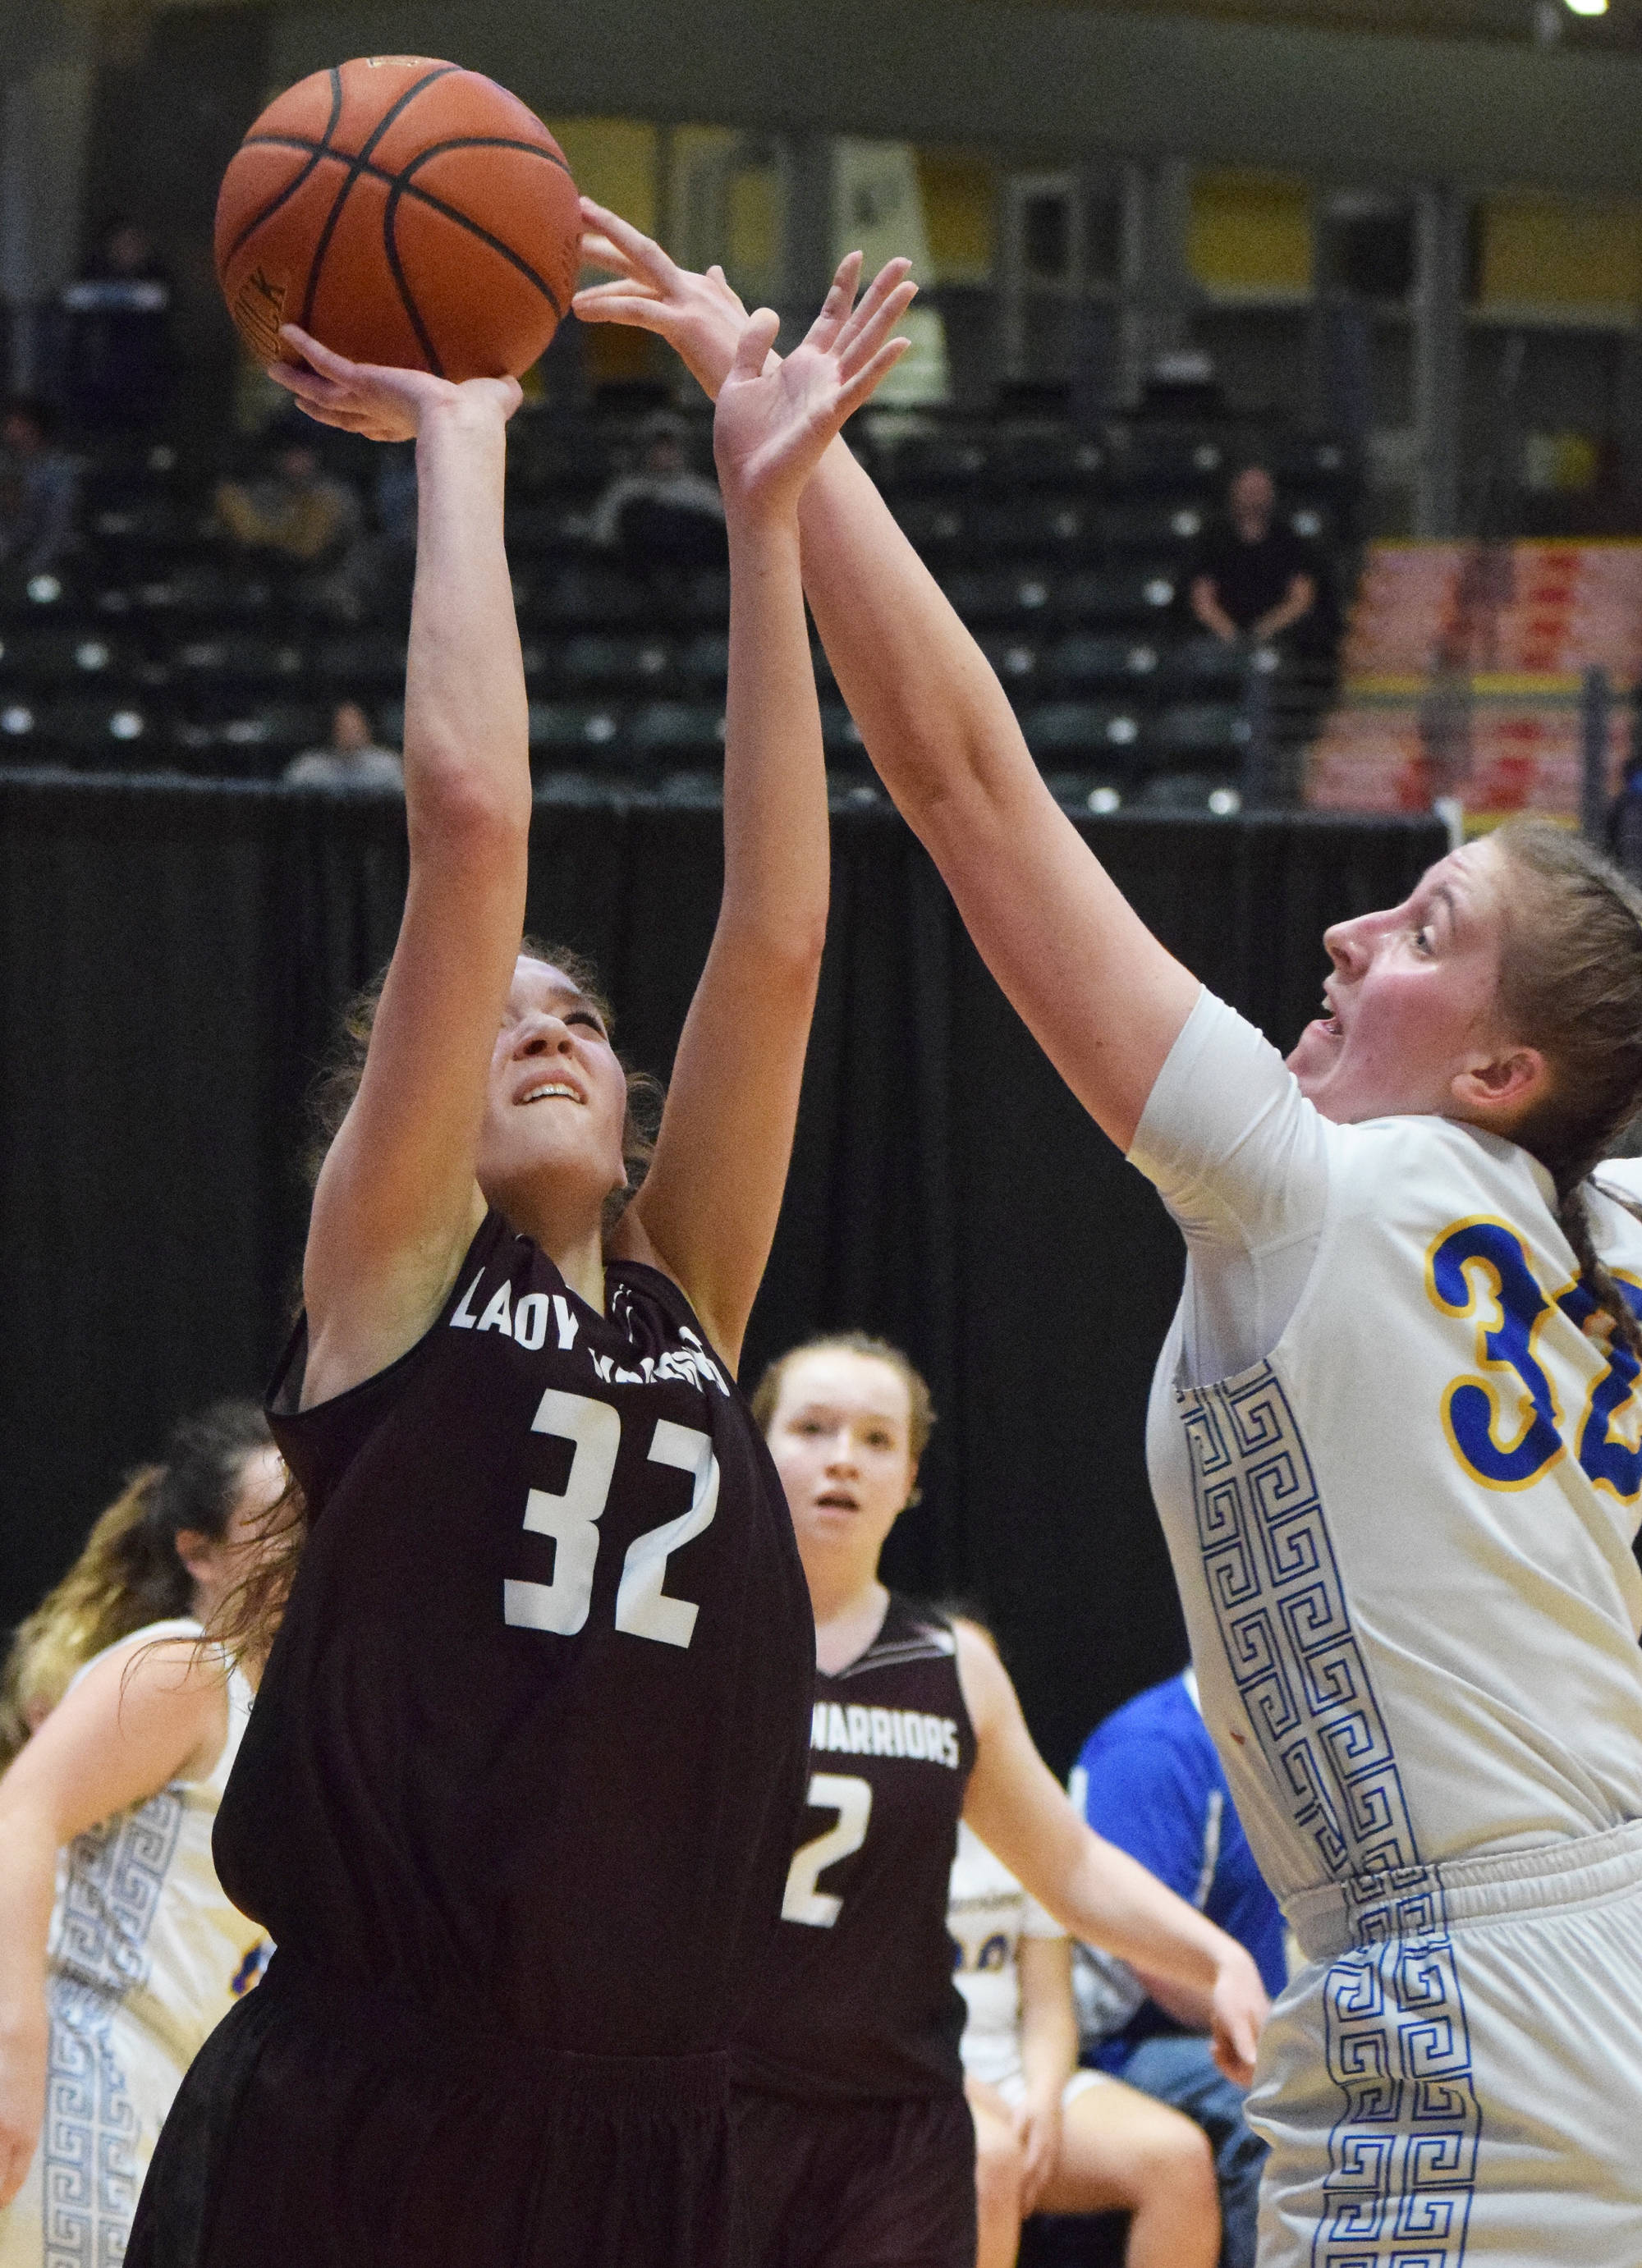 Nikolaevsk’s Elizabeth Fefelov (left) is rejected by Tri-Valley’s Rachel Cockman Thursday at the Class 1A girls state basketball tournament in Anchorage. (Photo by Joey Klecka/Peninsula Clarion)